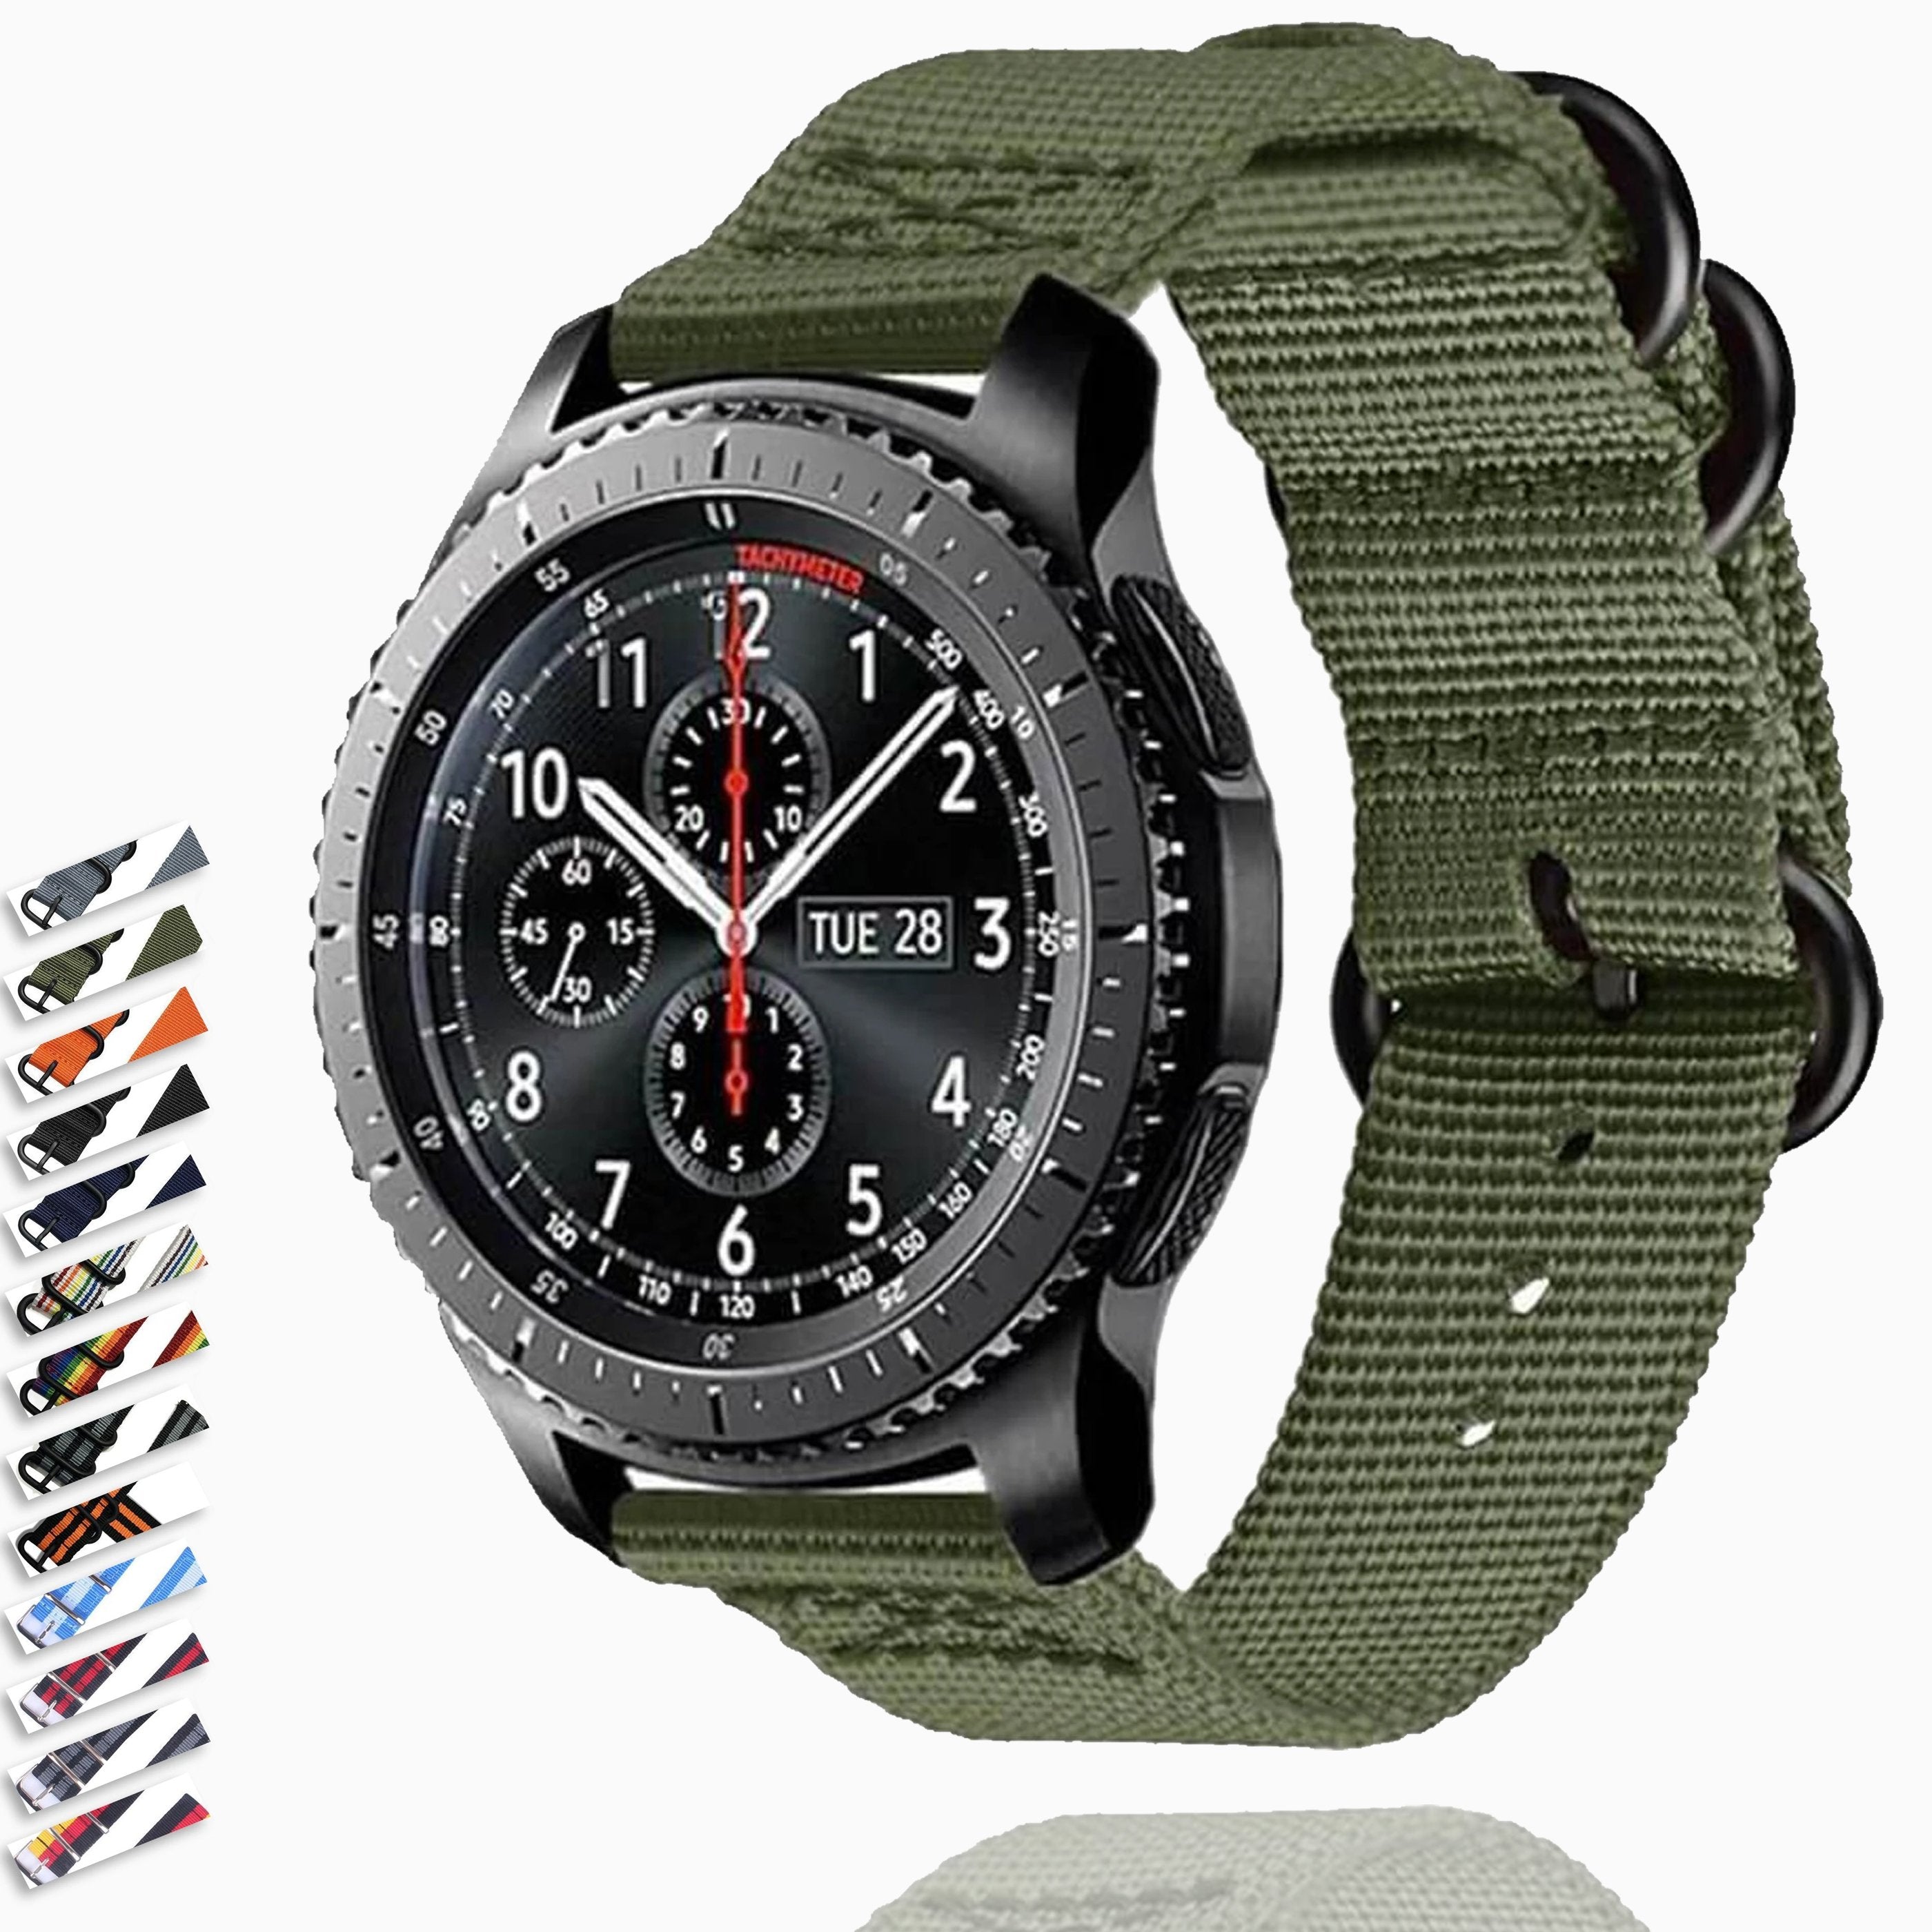 Nato strap for Samsung Galaxy watch 46mm/42mm/Active 2 band –